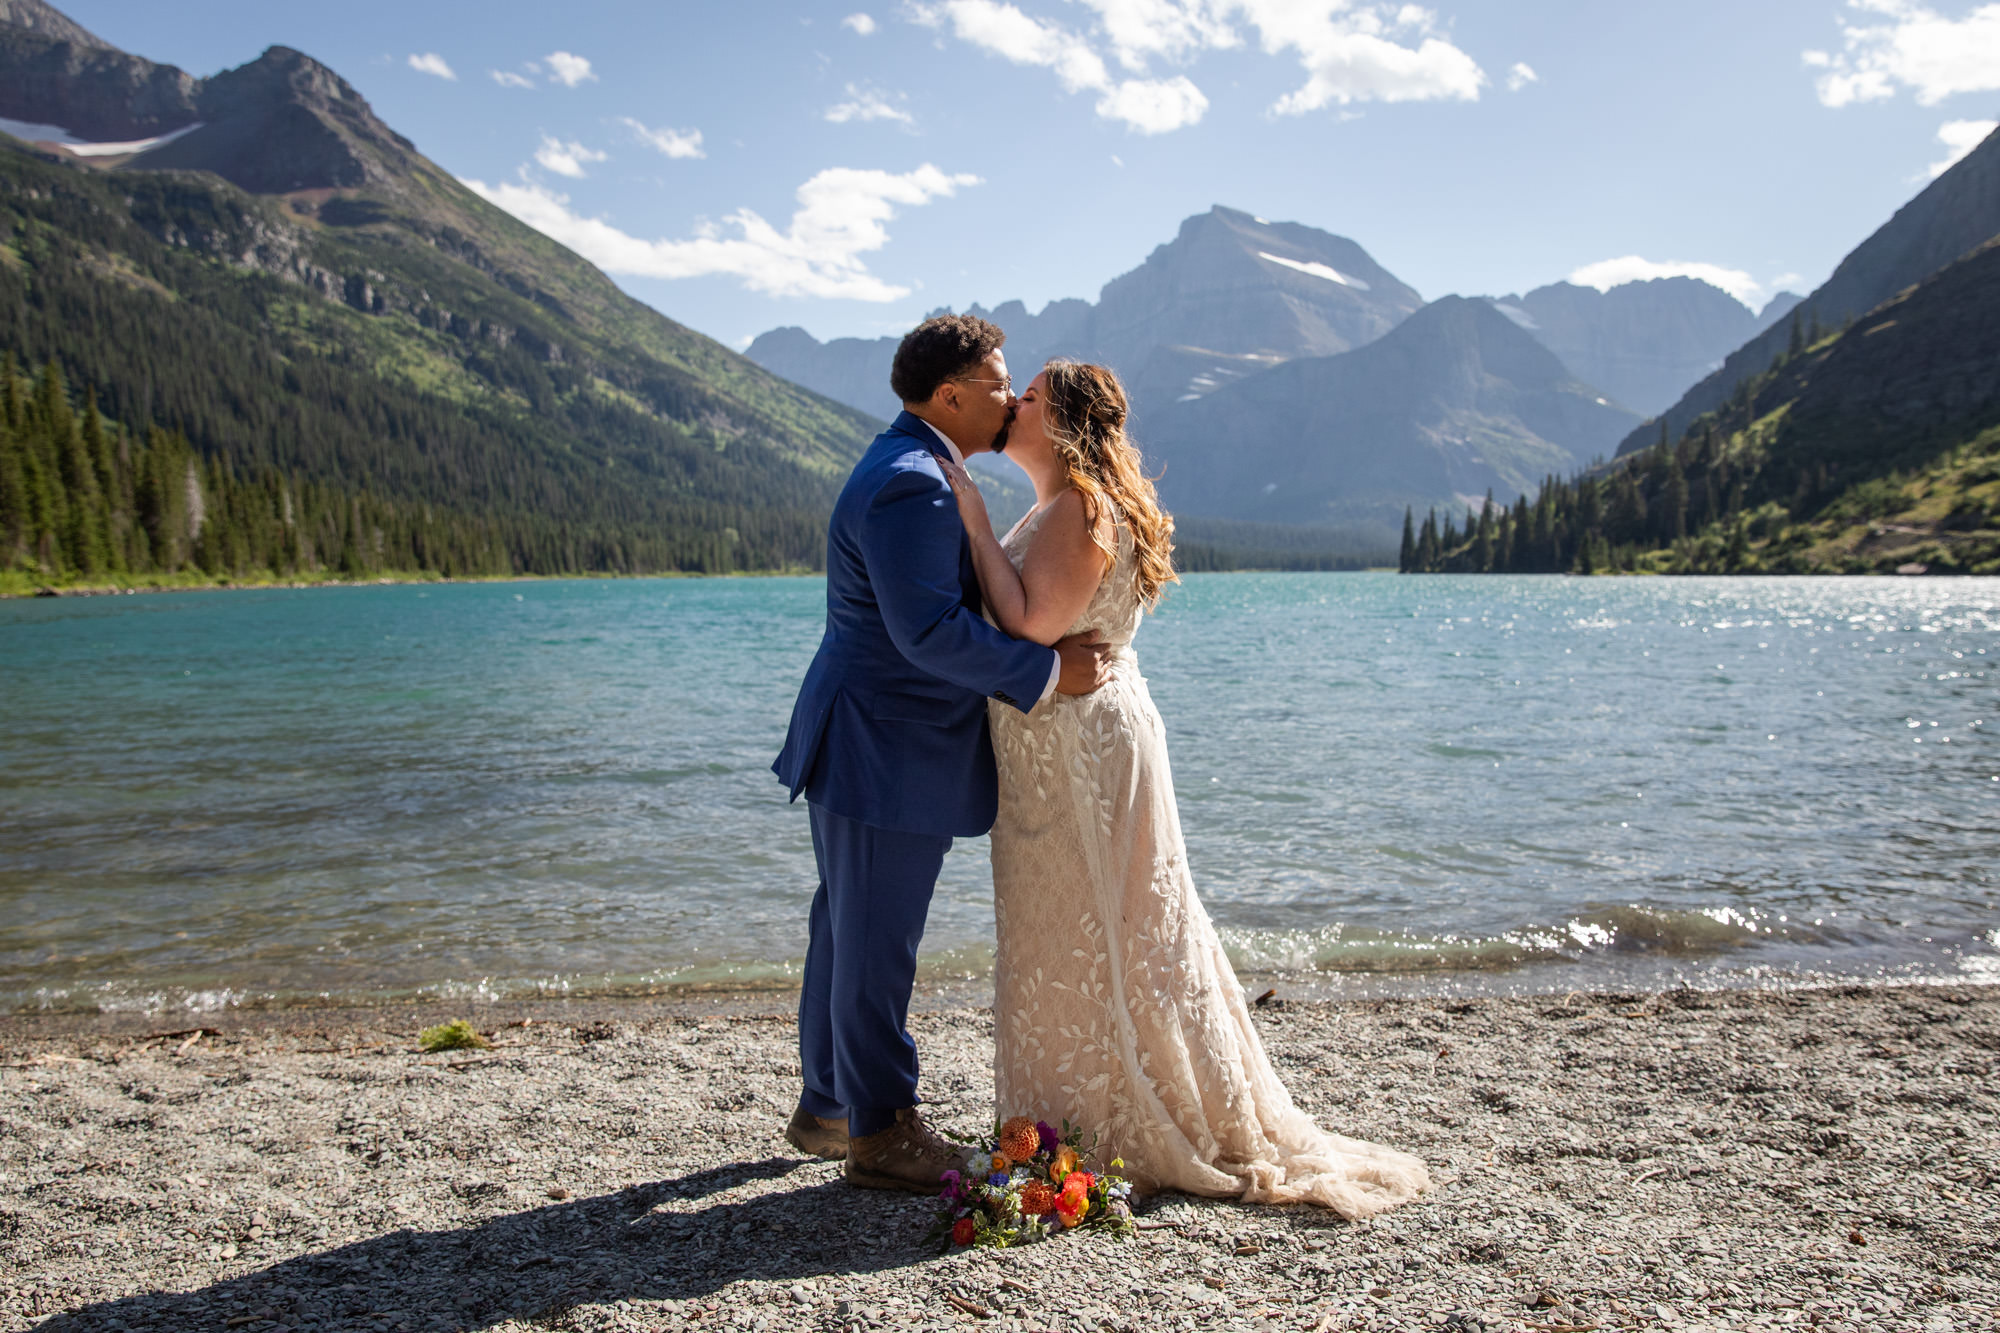 A bride and groom kiss on the shore of Lake Josephine after eloping in Glacier national park.